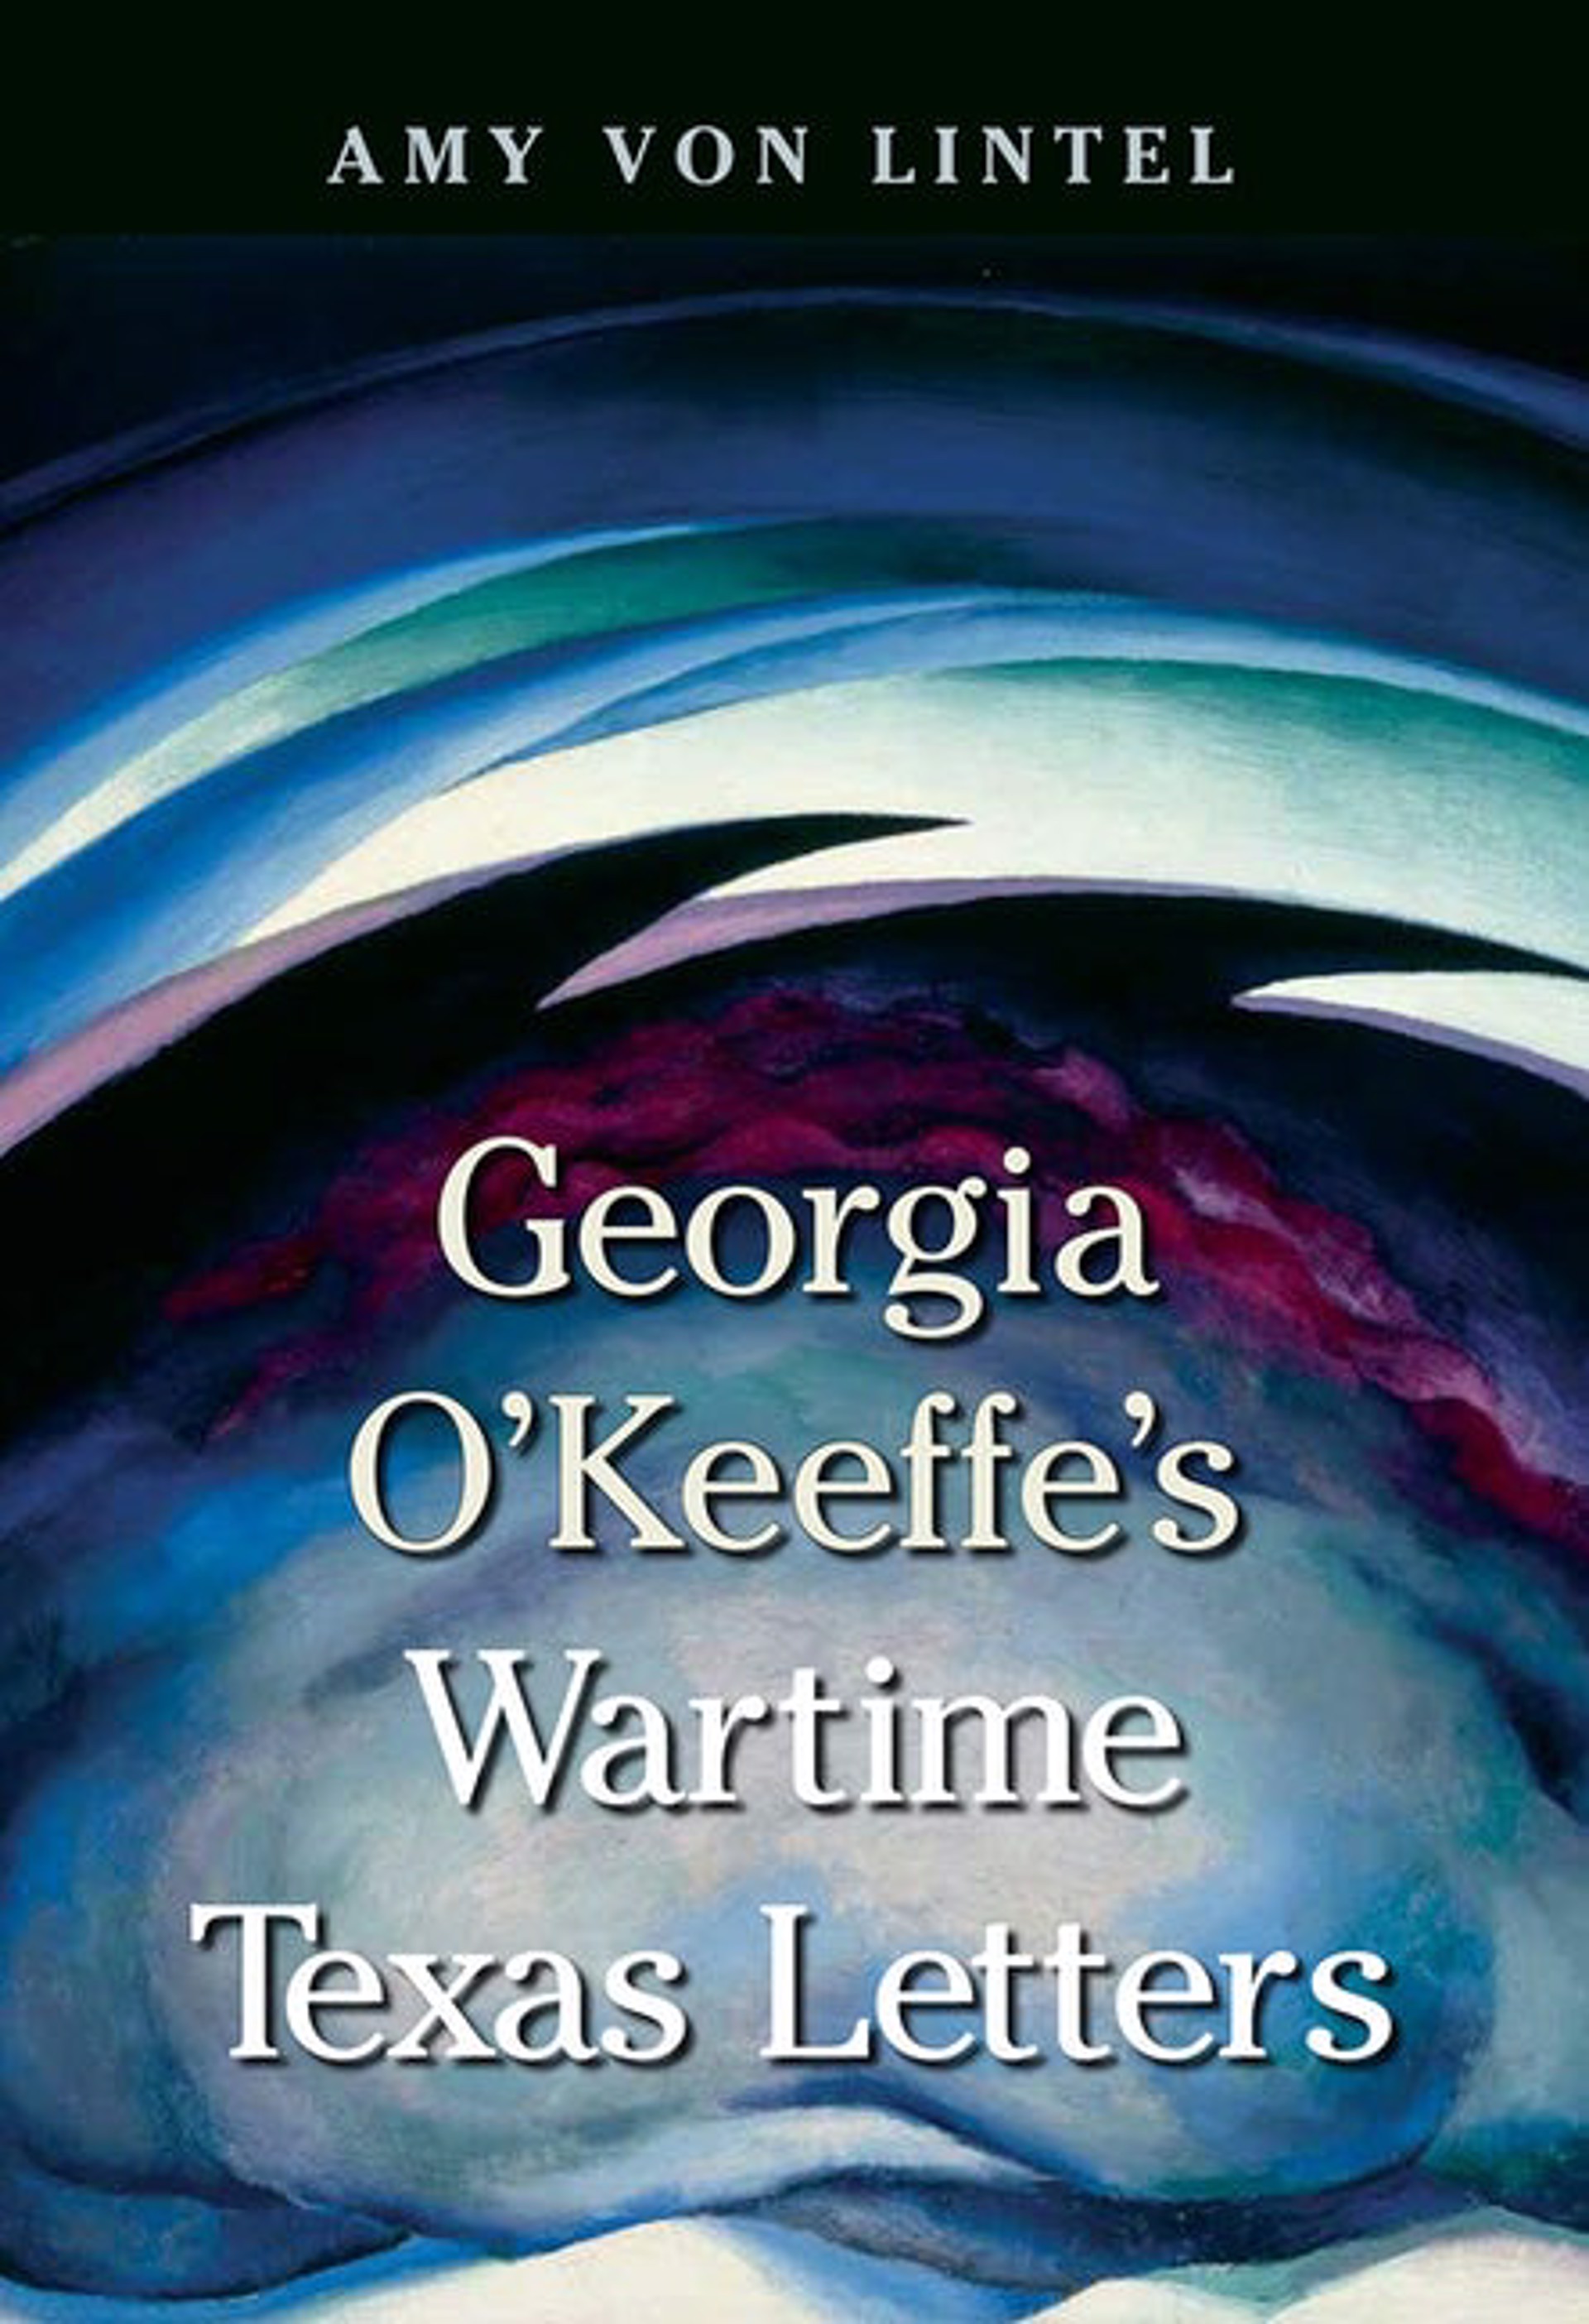 Georgia O'Keeffe's Wartime Texas Letters By Amy Von Lintel by Publications